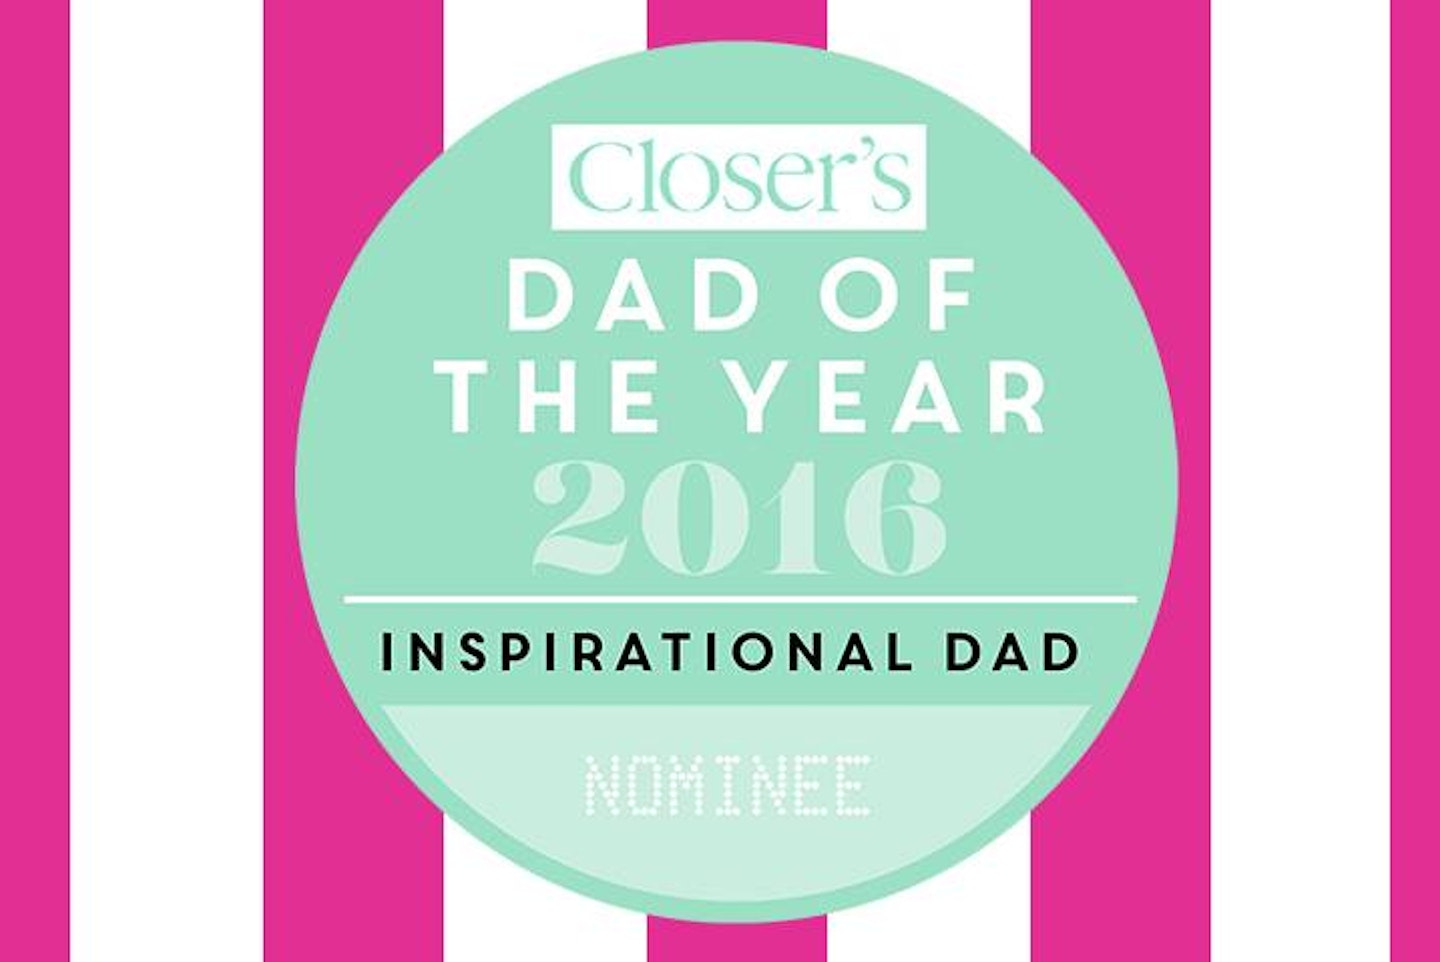 closer inspirational dad of the year 2016